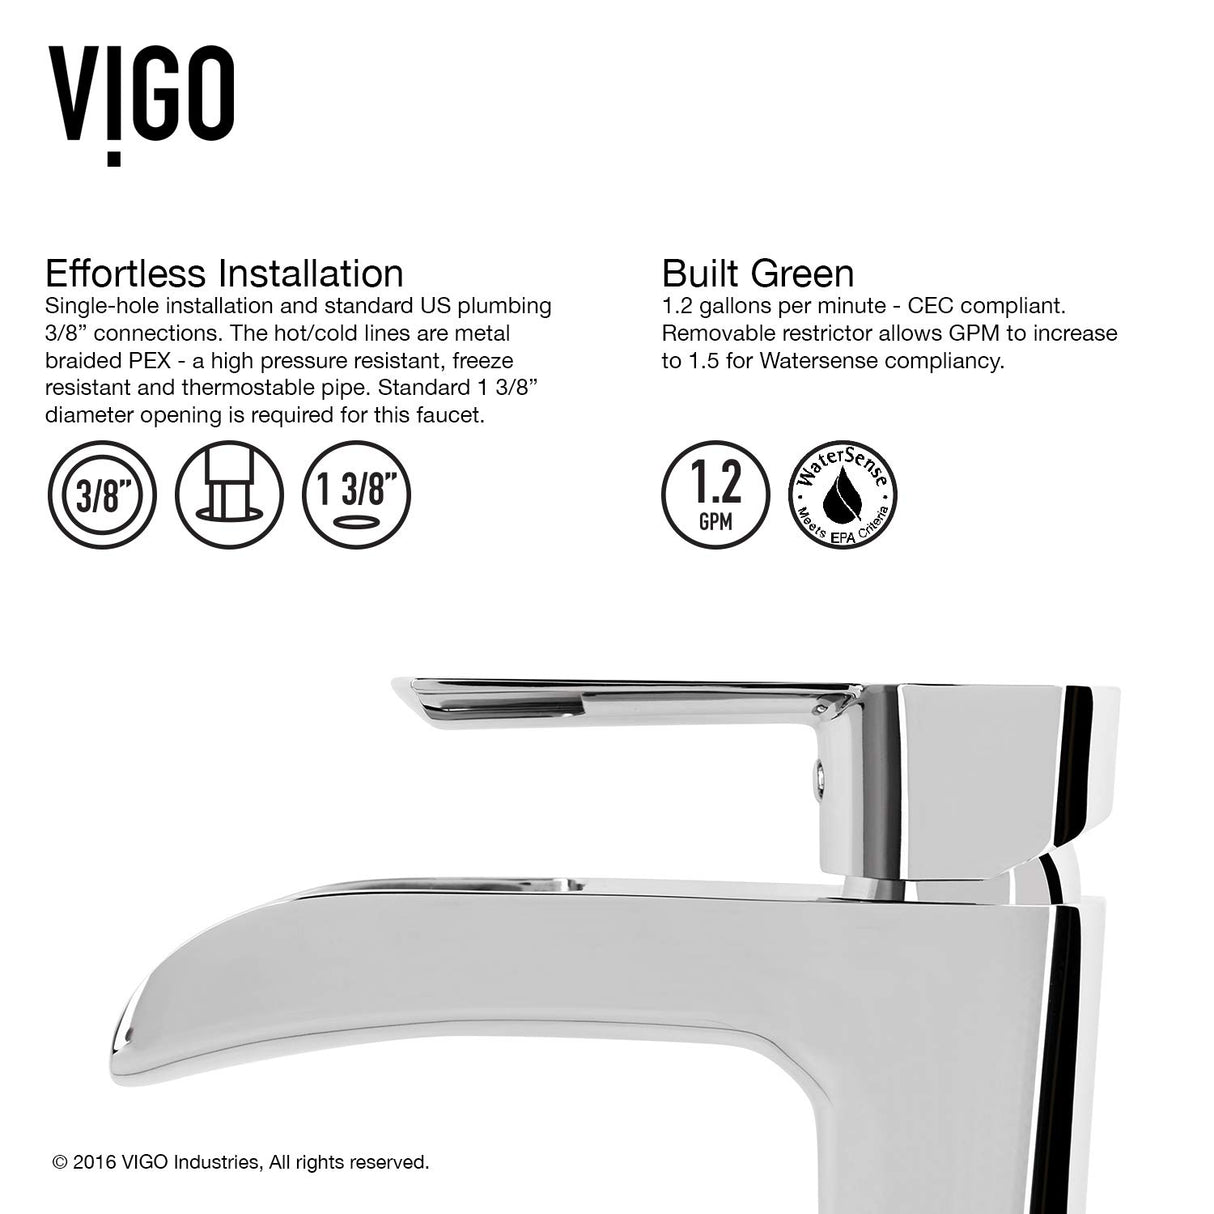 VIGO VGT1702 18.13" L -13.0" W -10.5" H Handmade Countertop Glass Rectangle Vessel Bathroom Sink Set in Slate Grey Finish with Chrome Single-Handle Single Hole Waterfall Faucet and Pop Up Drain